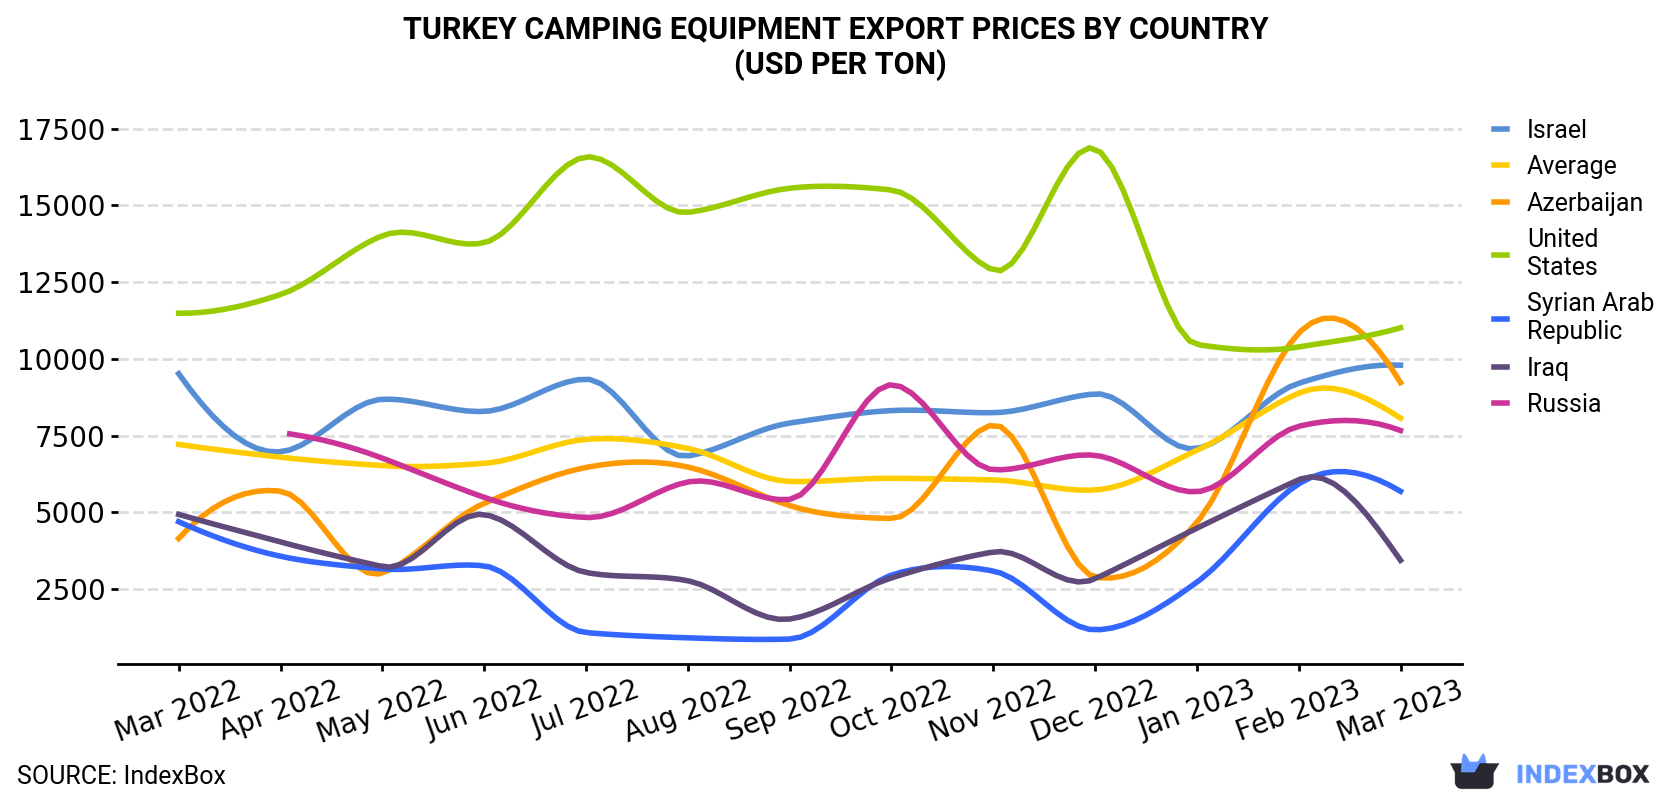 Turkey Camping Equipment Export Prices By Country (USD Per Ton)